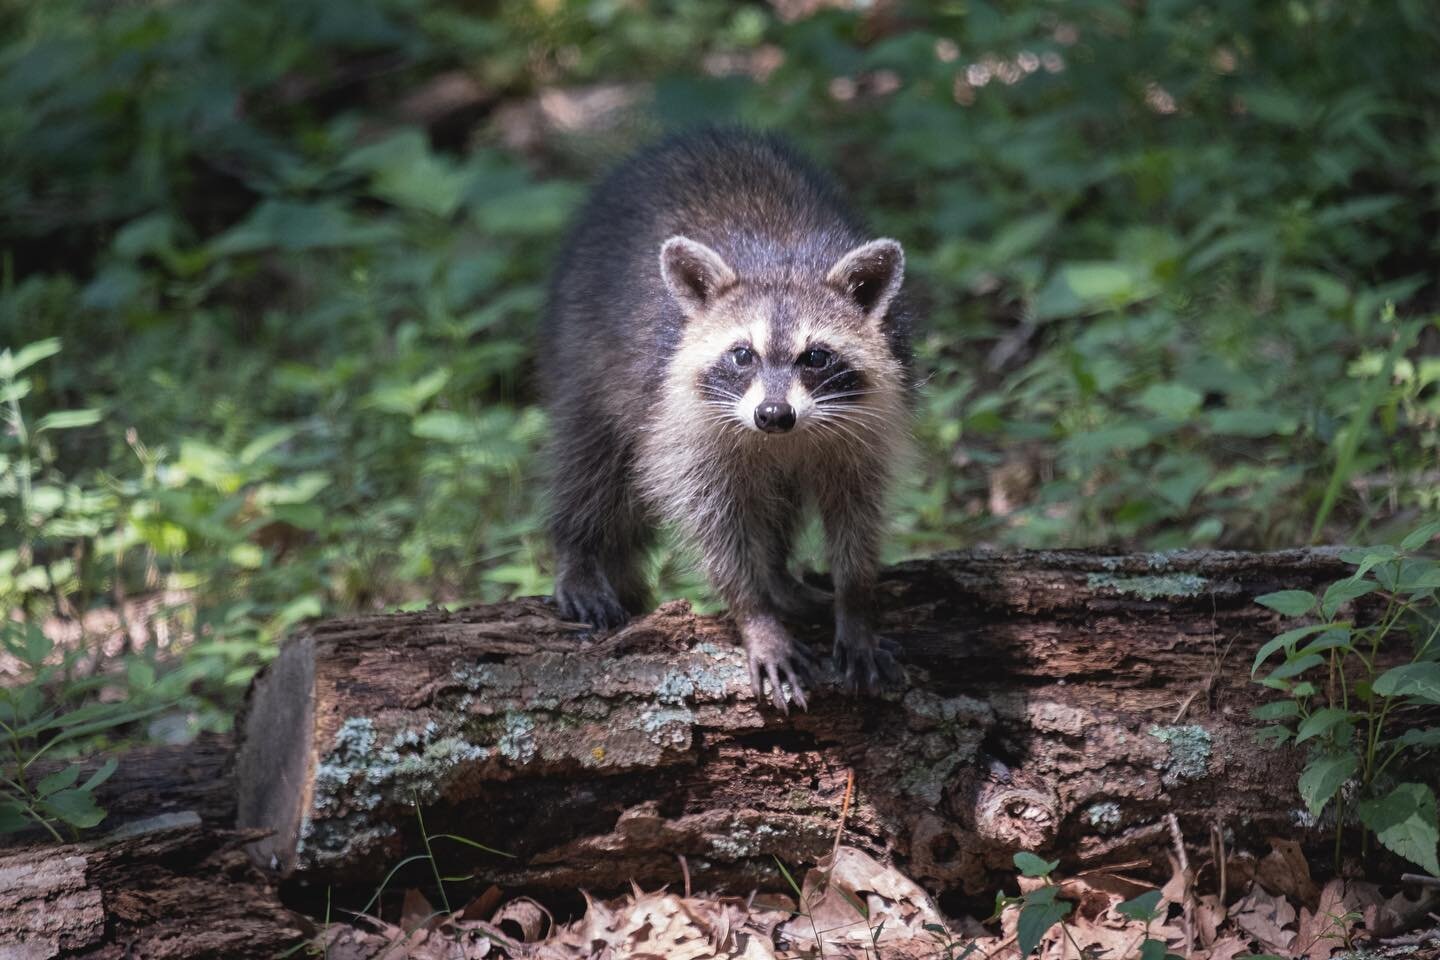 Came across this cute little raccoon (Procyon lotor) and the rest of his family a couple of weeks back. 🦝 They were all very charismatic and fun to watch. Unfortunately, this little family was quite habituated. They showed no fear of the humans in t